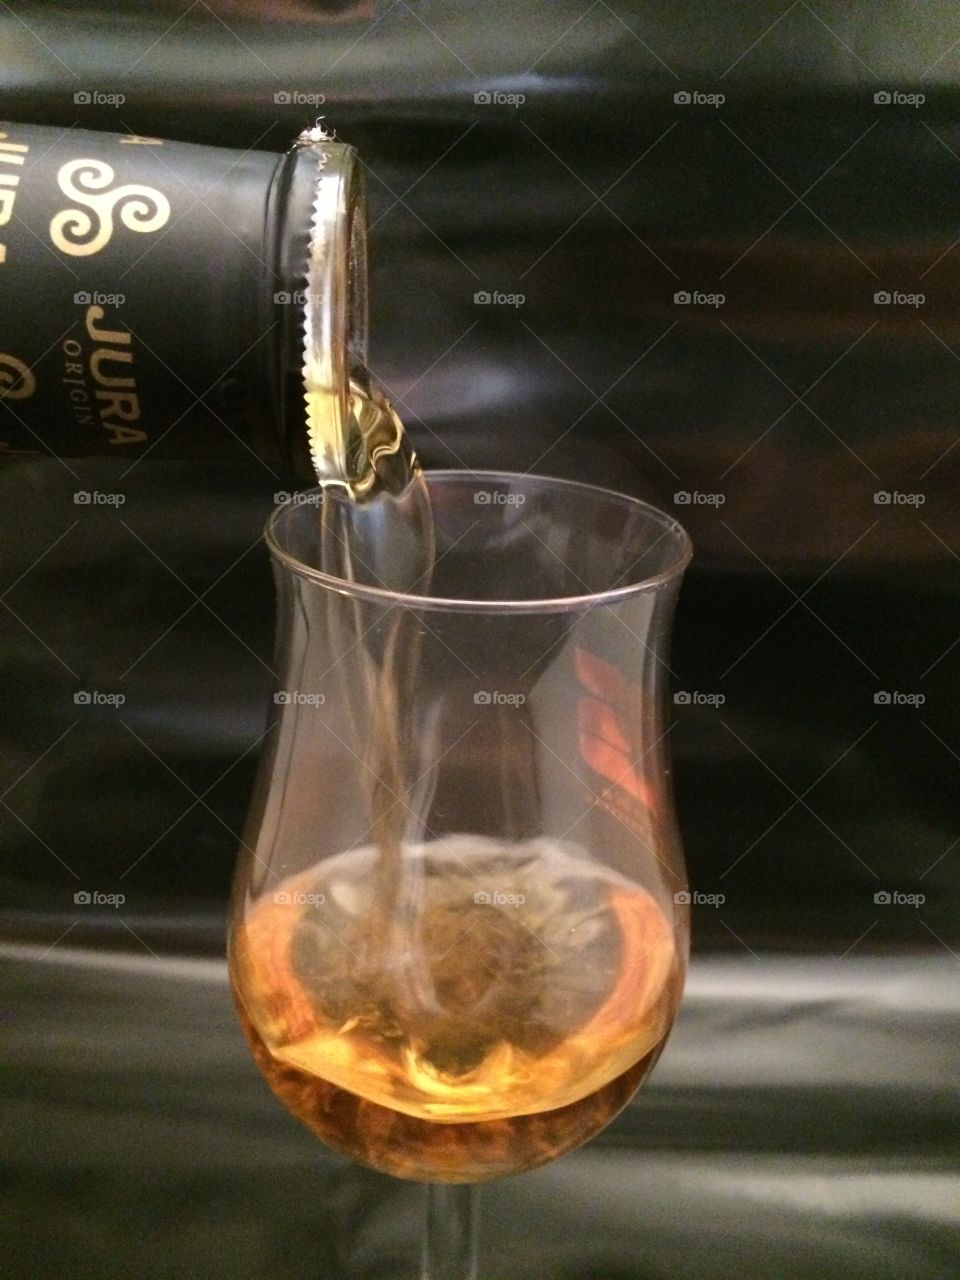 Pouring some whisky